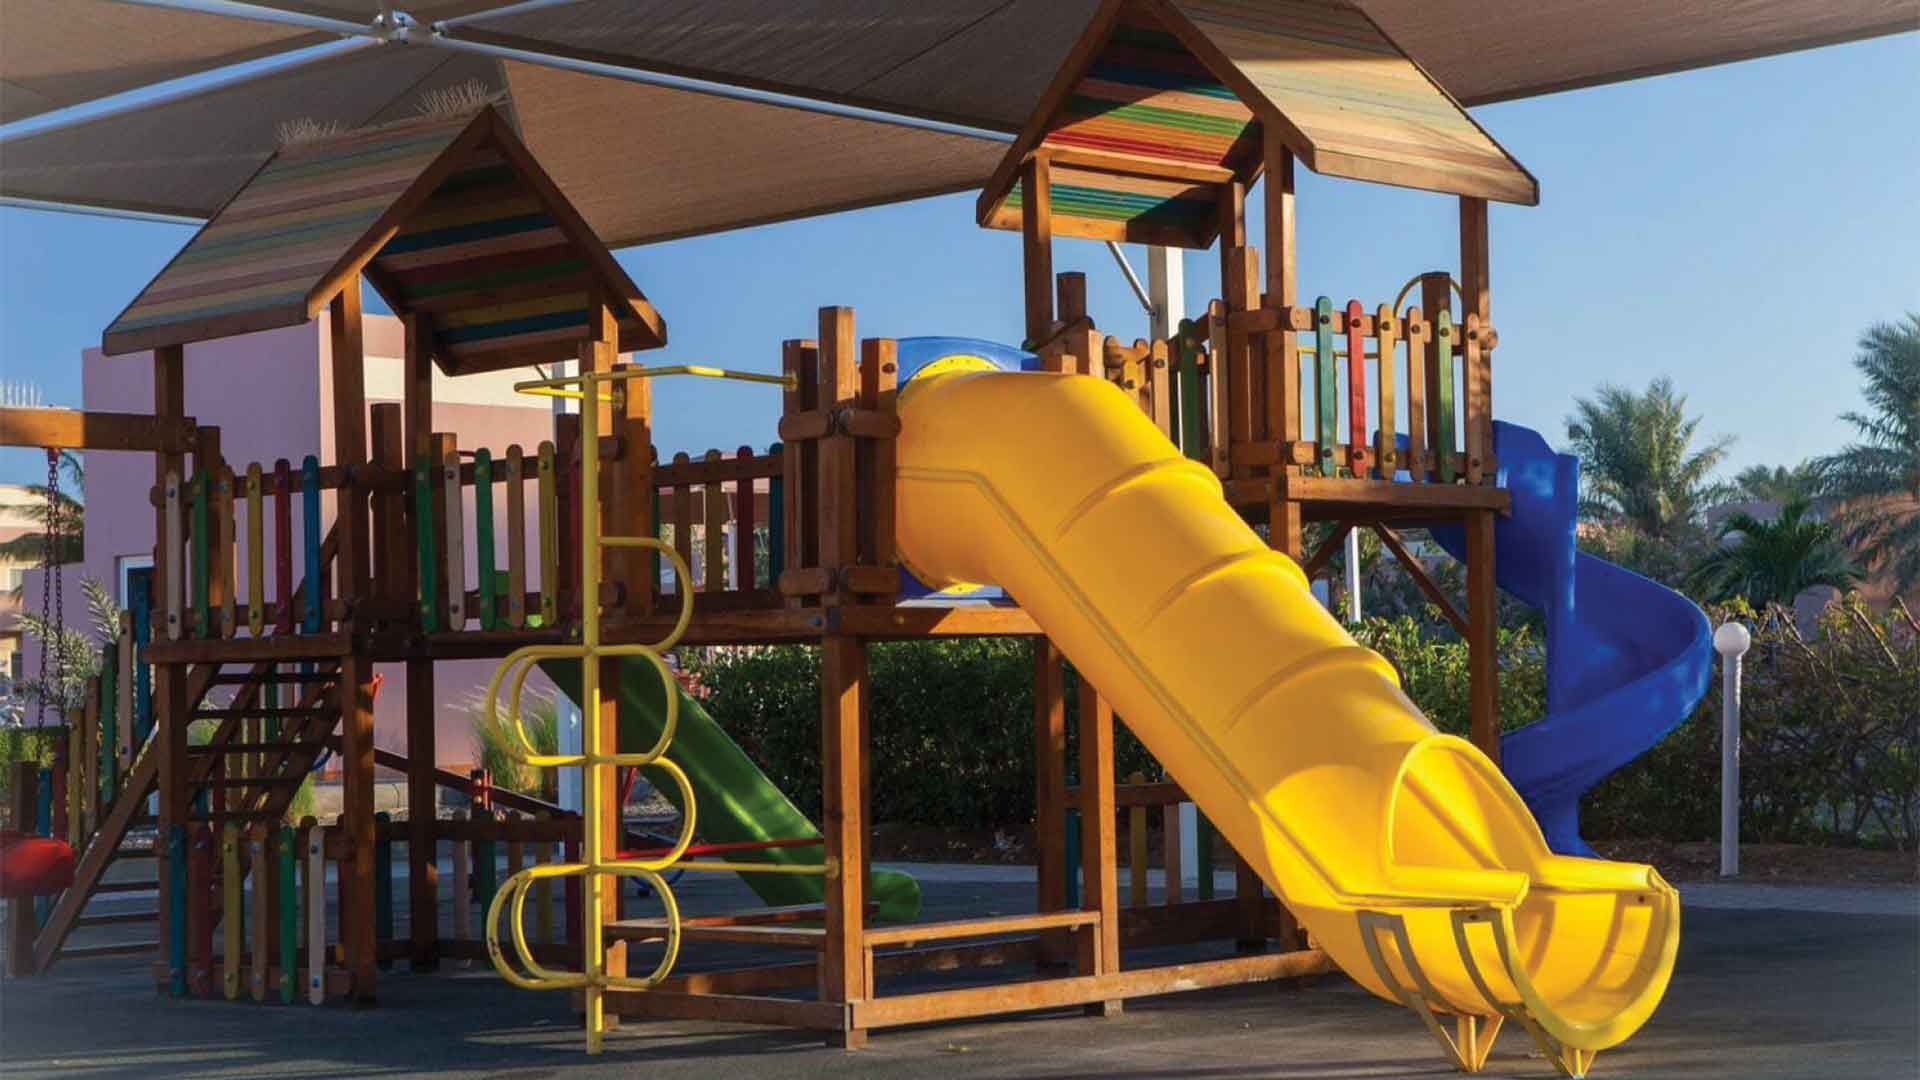 A Commercial Playground In Your Own Backyard?